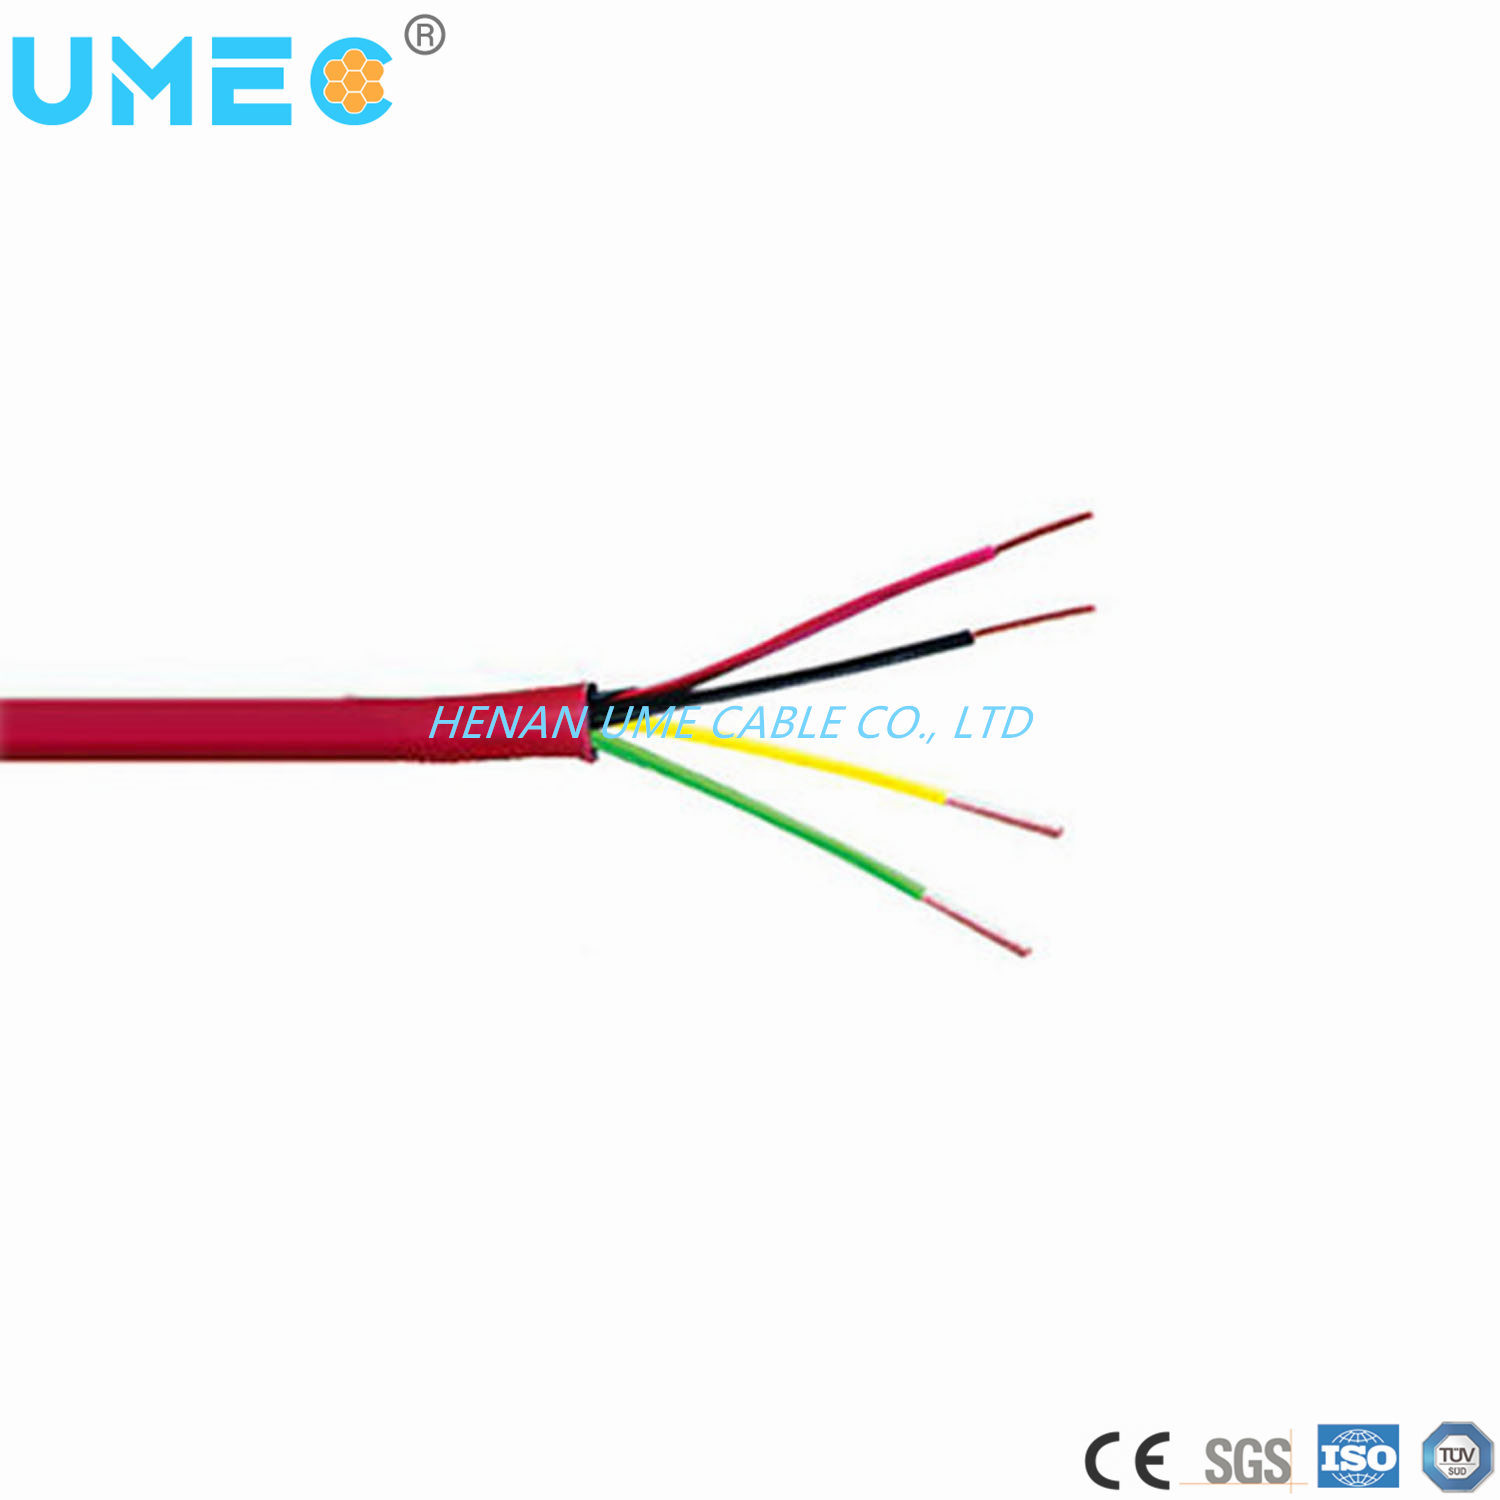 14 AWG 4 Cores Solid Fplr Fire Alarm Cable